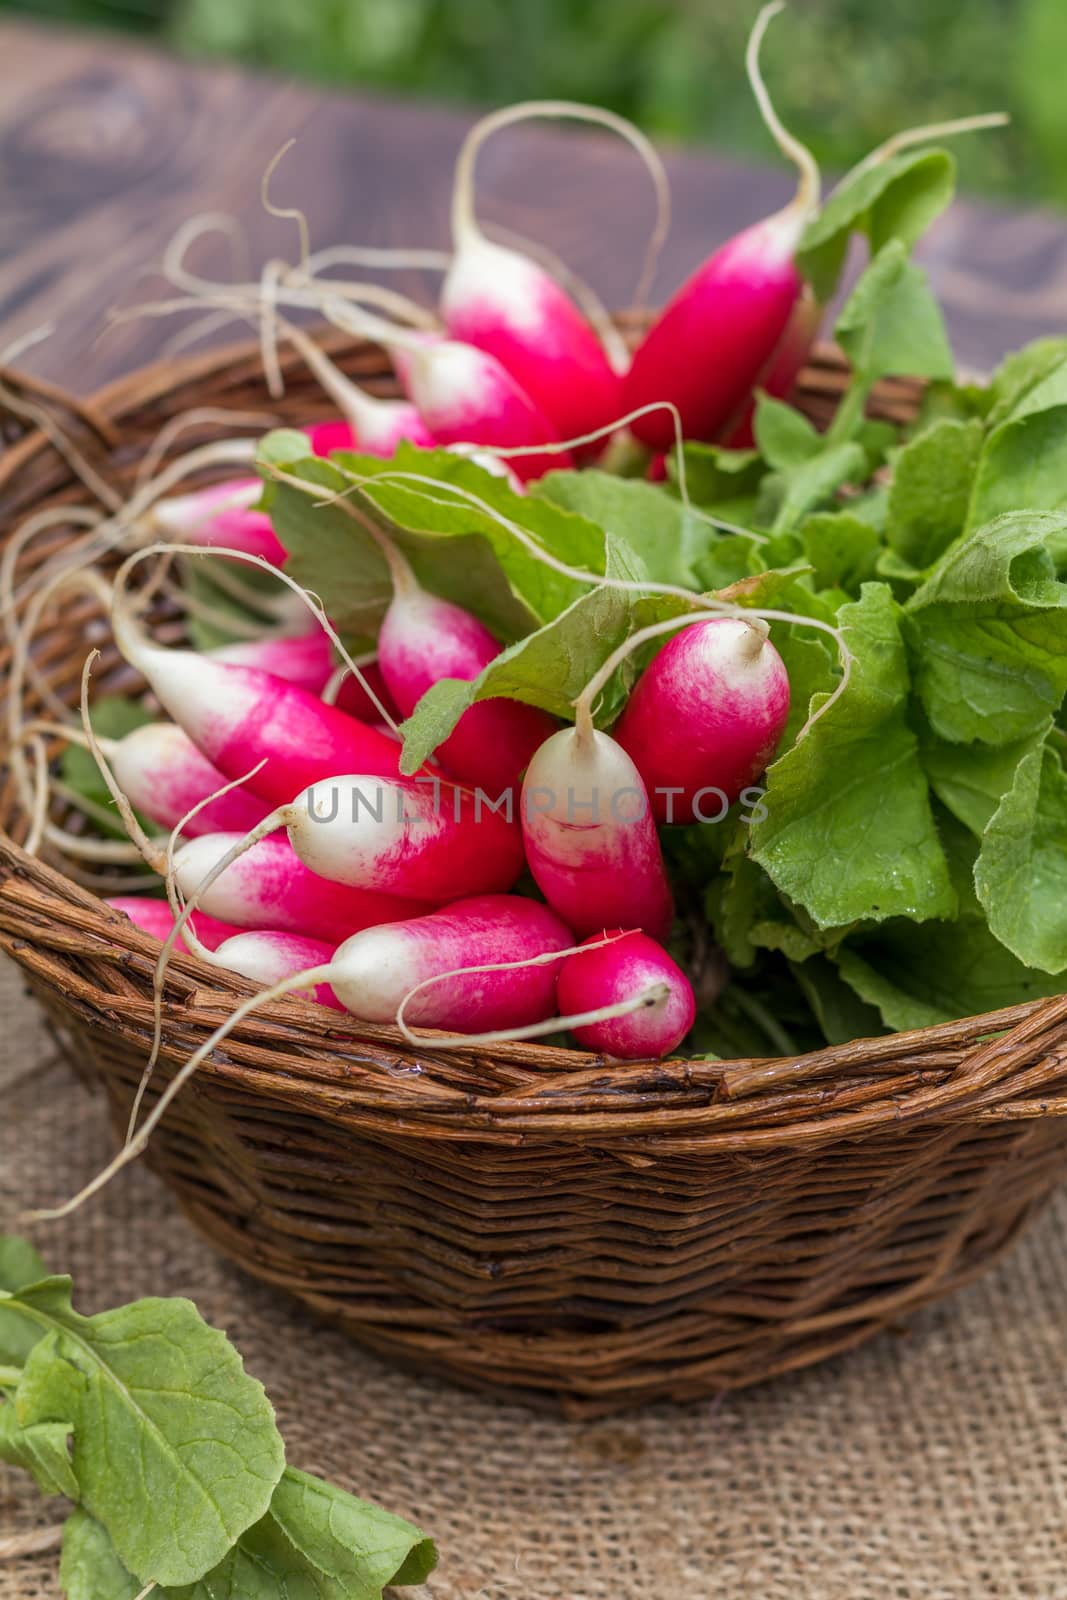 Bunch of fresh radishes in a wicker basket. Close-up